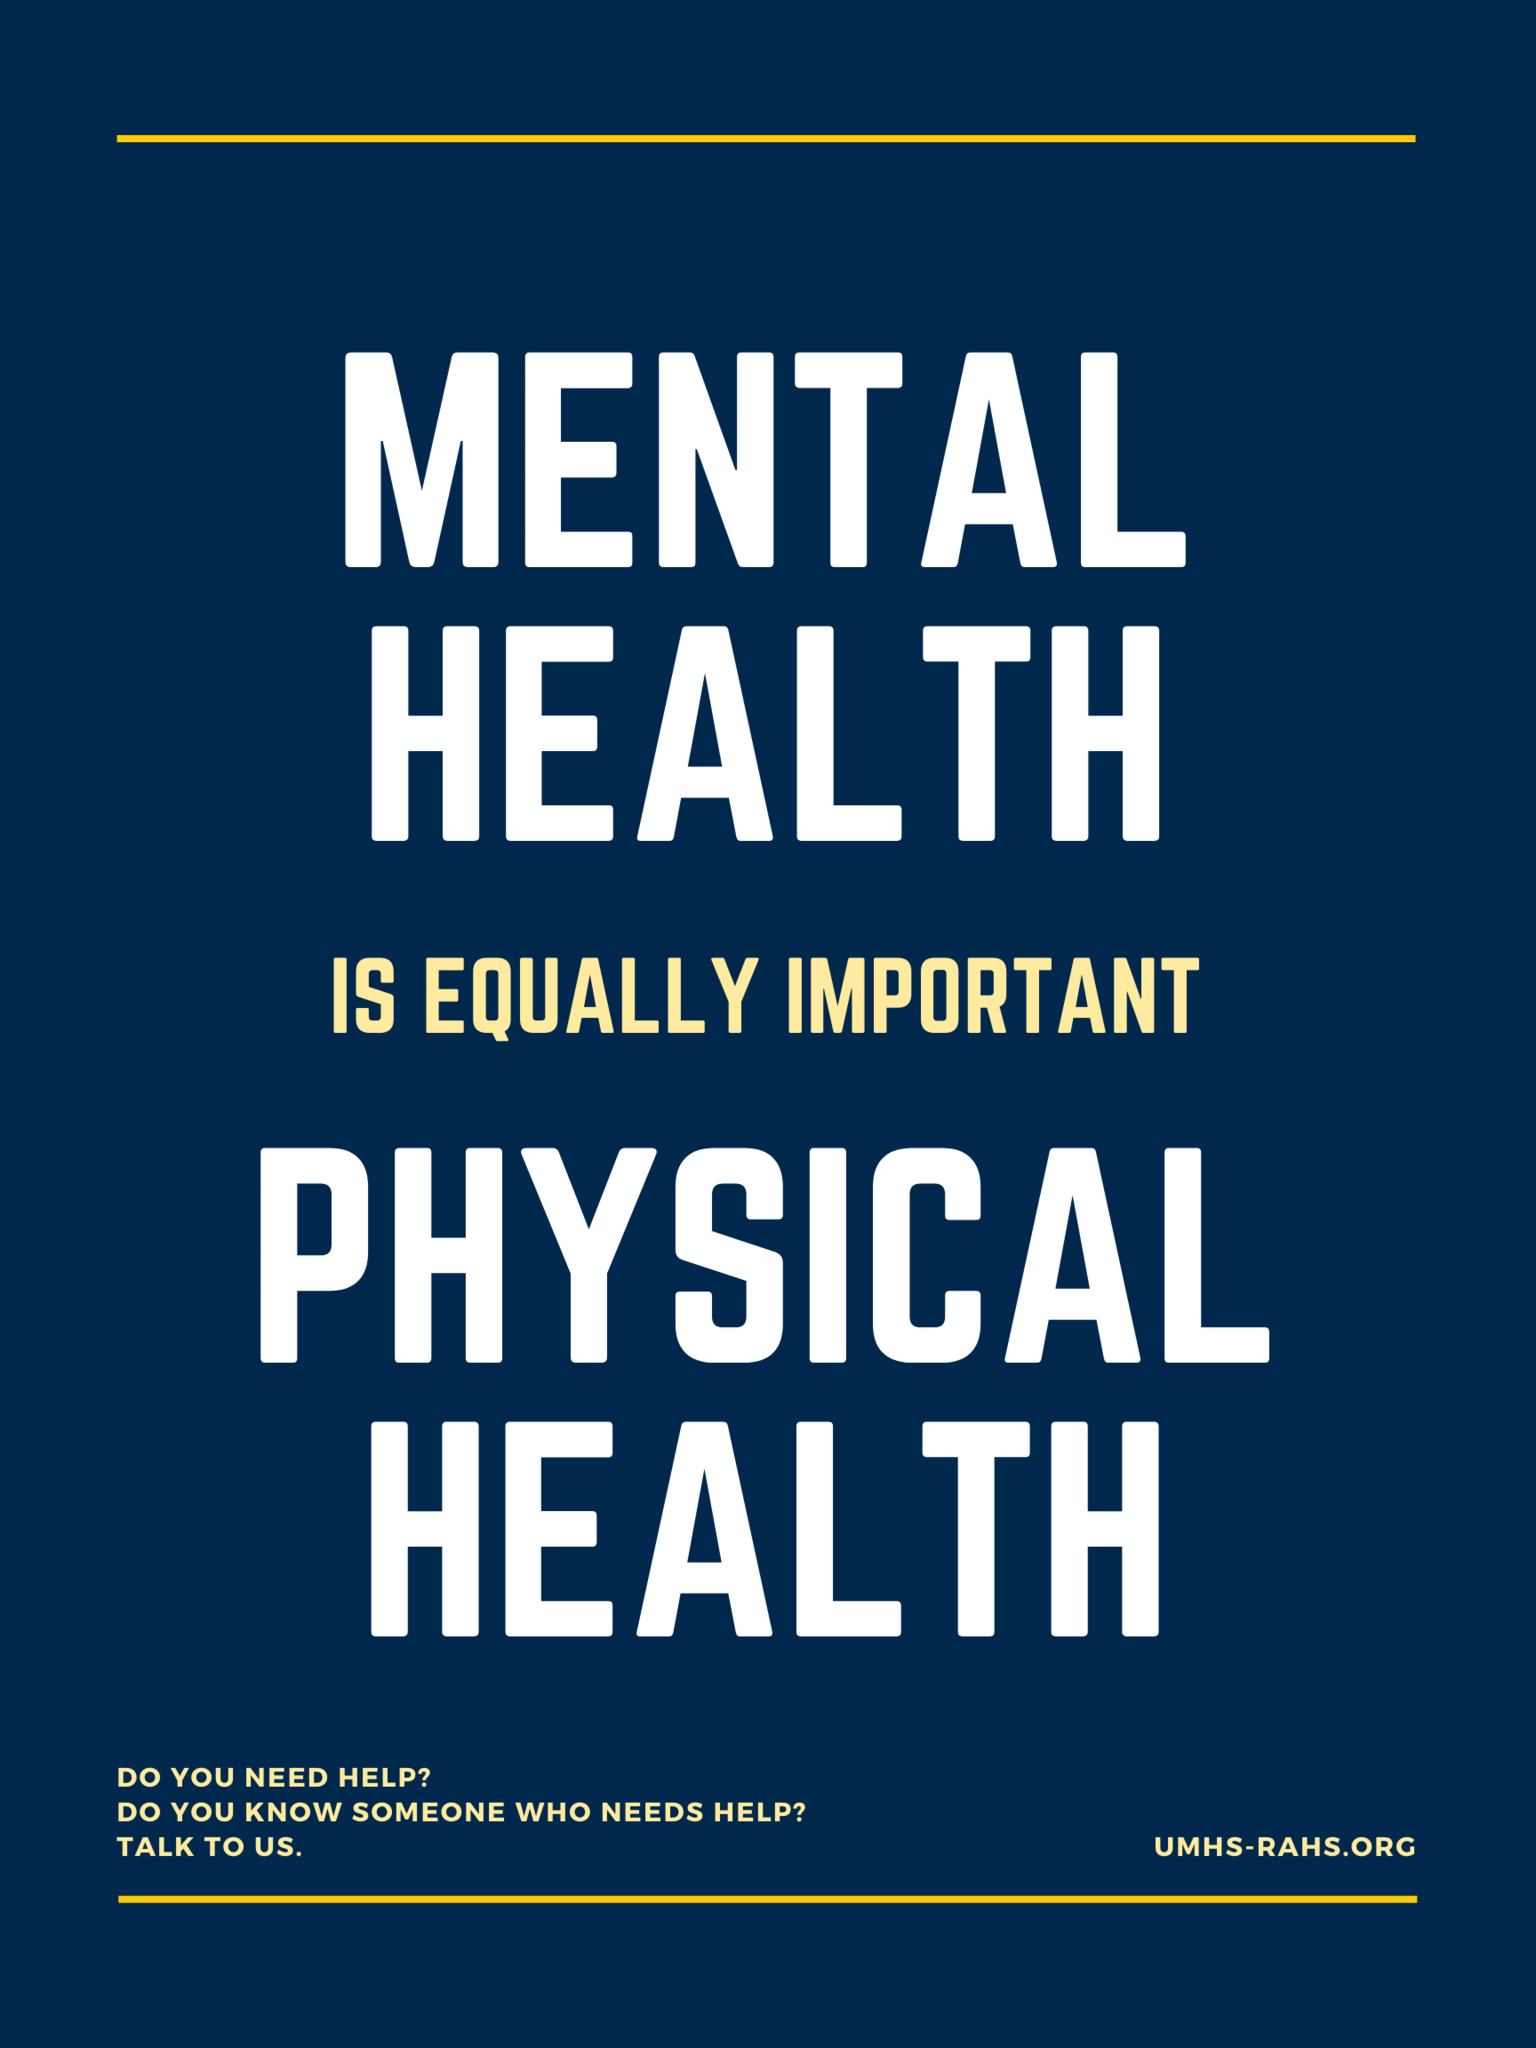 Mental Health is equally important as physical health